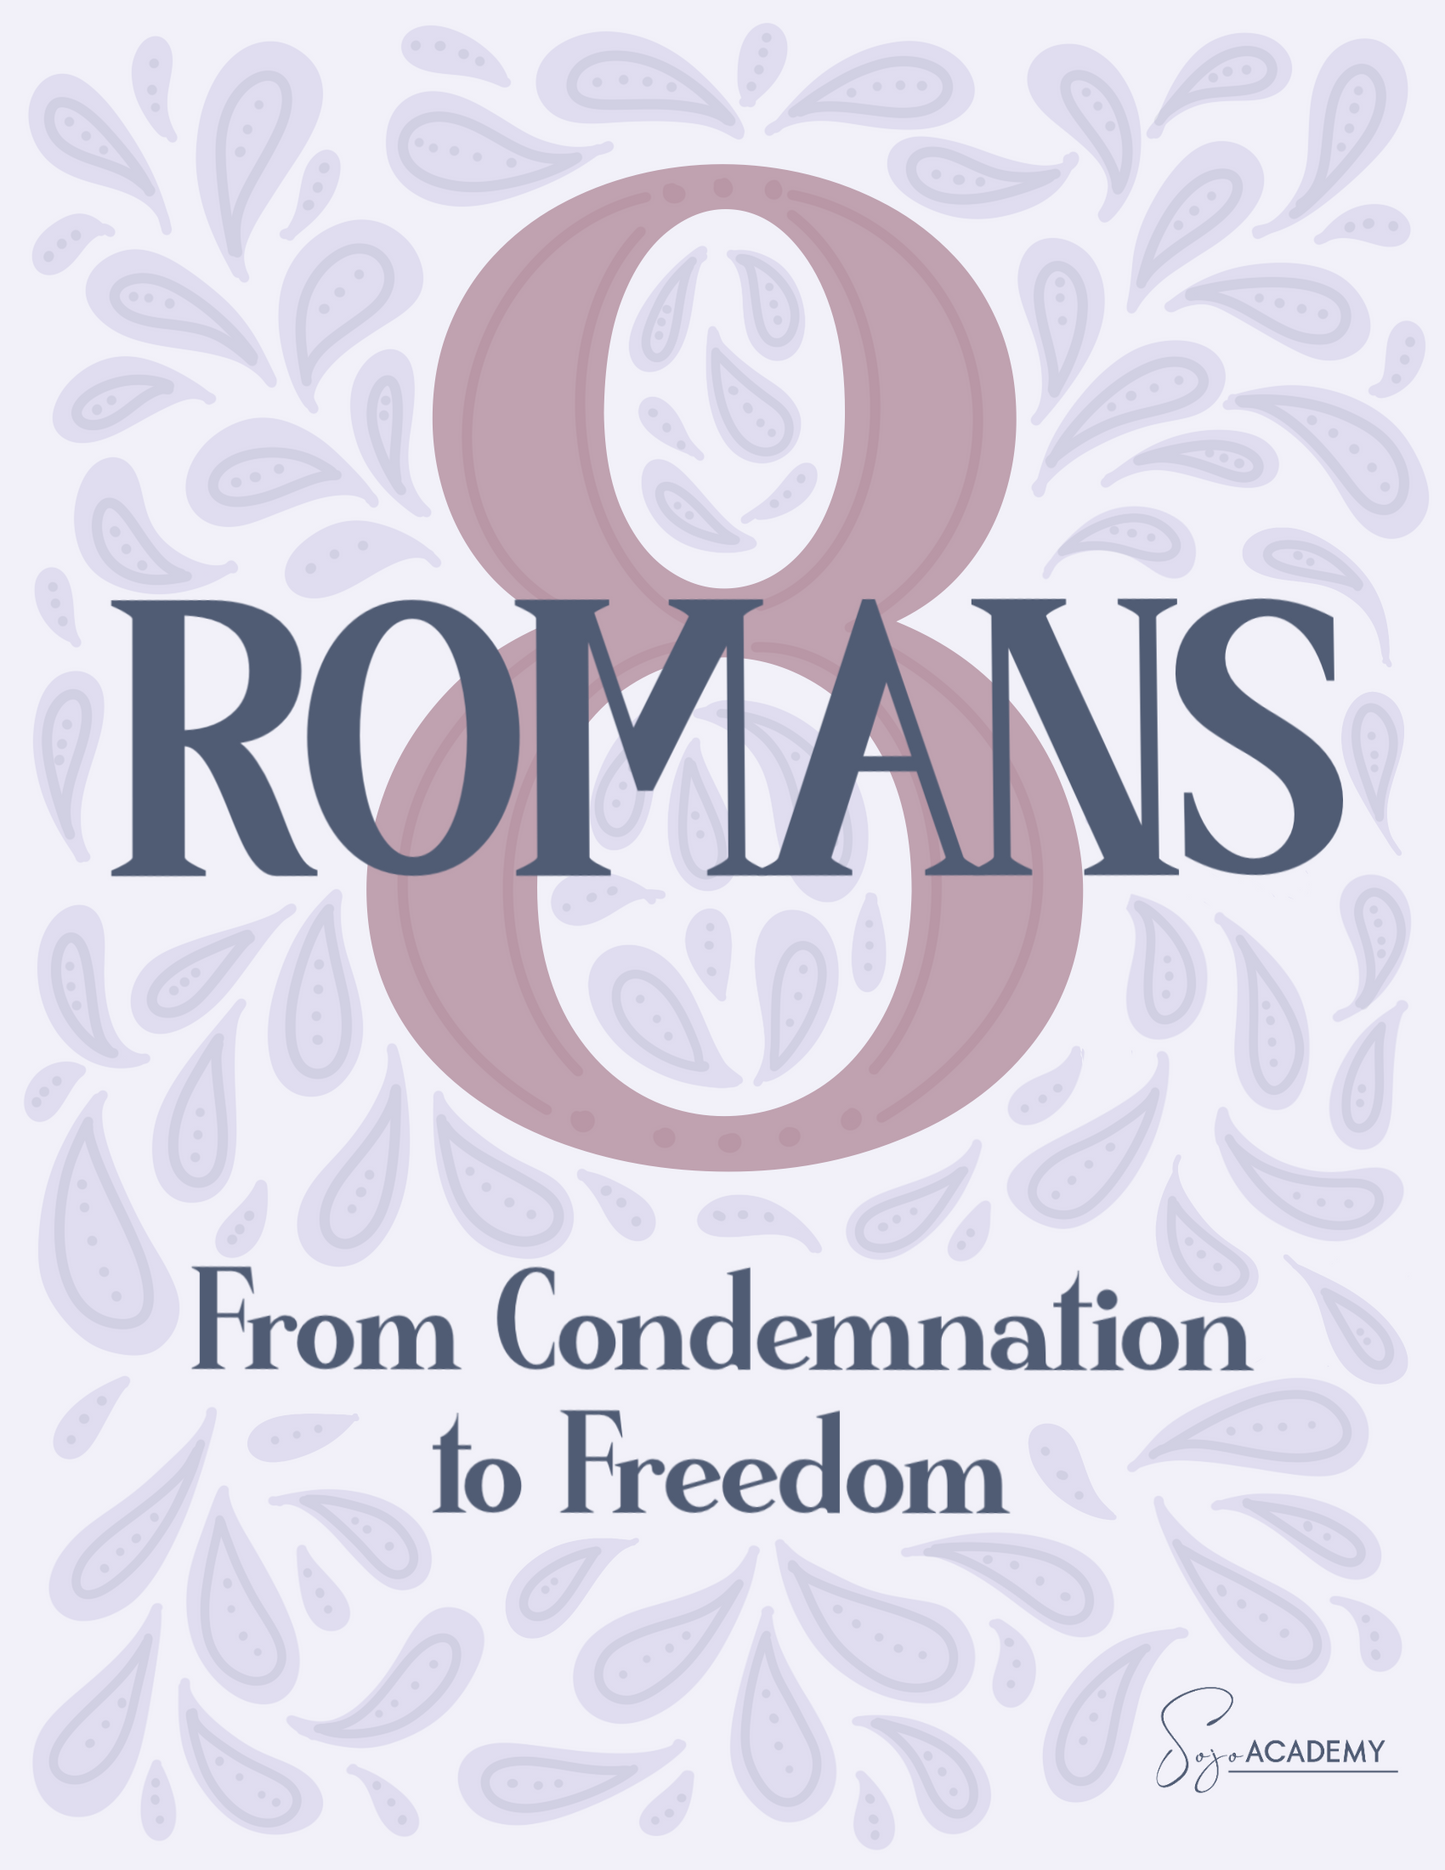 Romans 8: From Condemnation to Freedom